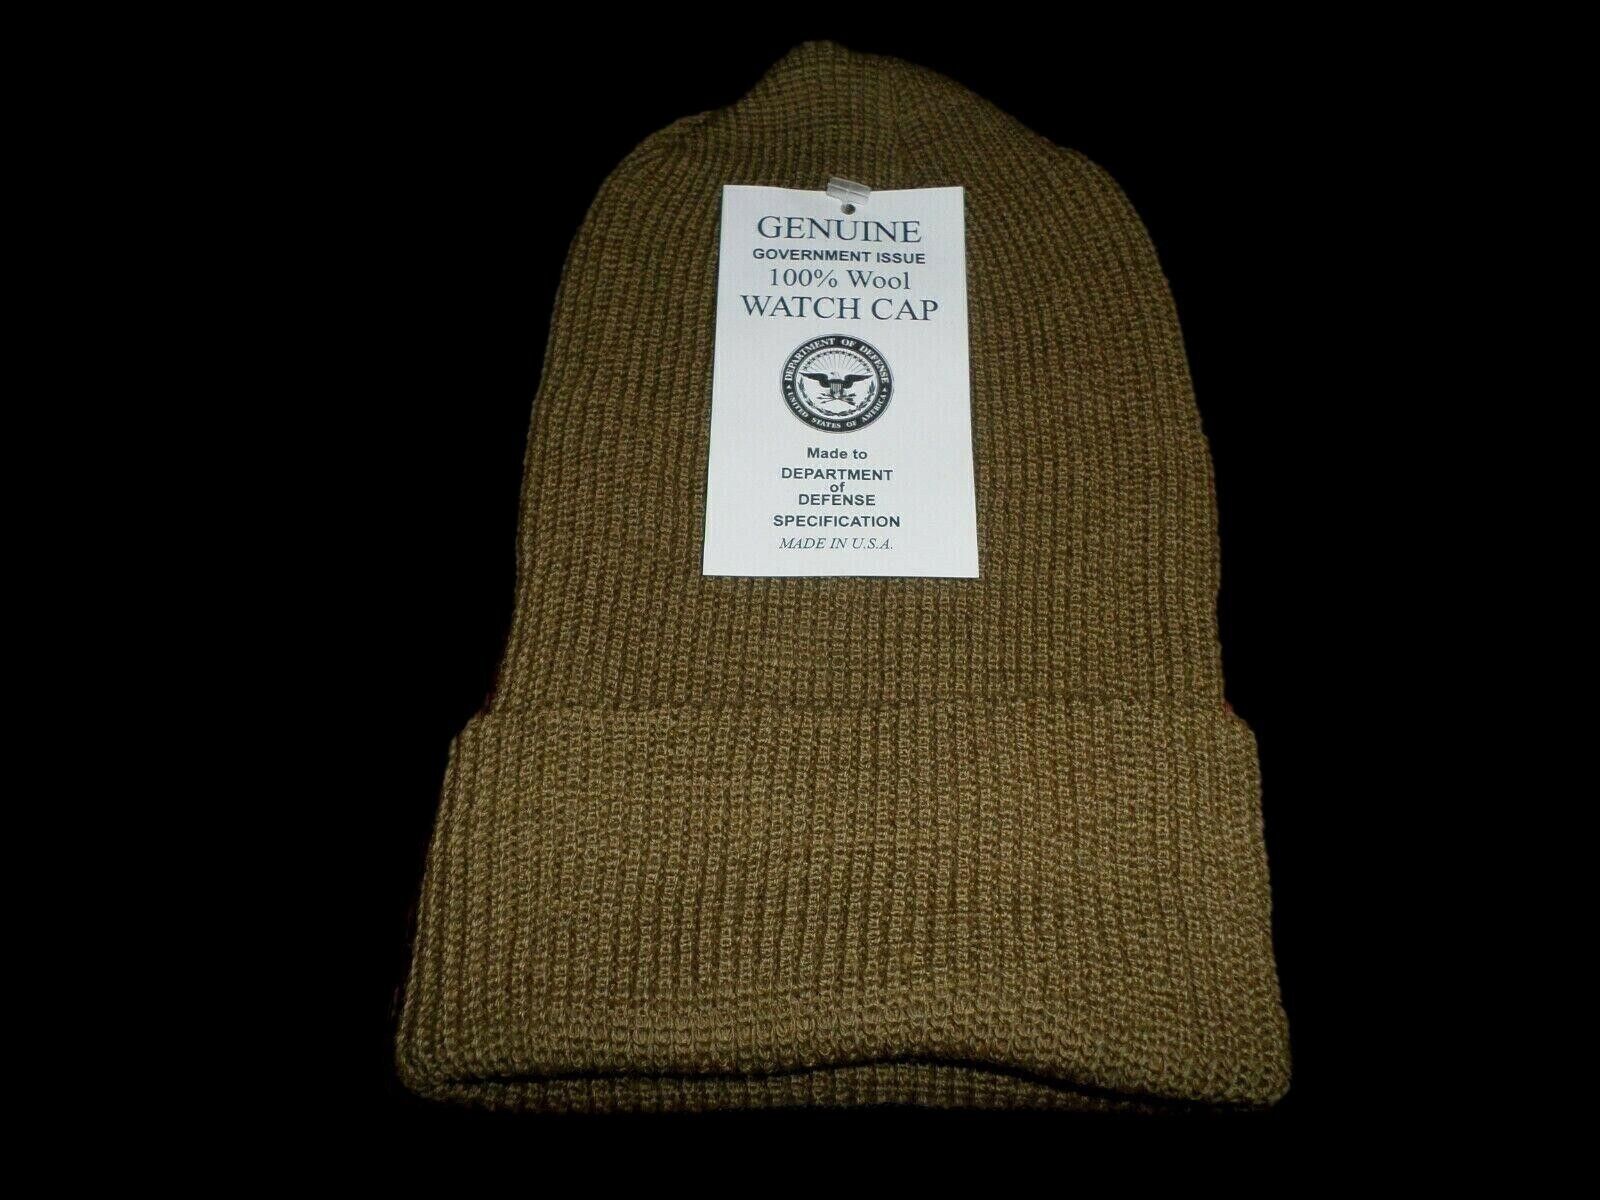 NEW GENUINE MILITARY ISSUE 100% WOOL BROWN WATCH CAP COLD WEATHER HAT U.S.A MADE